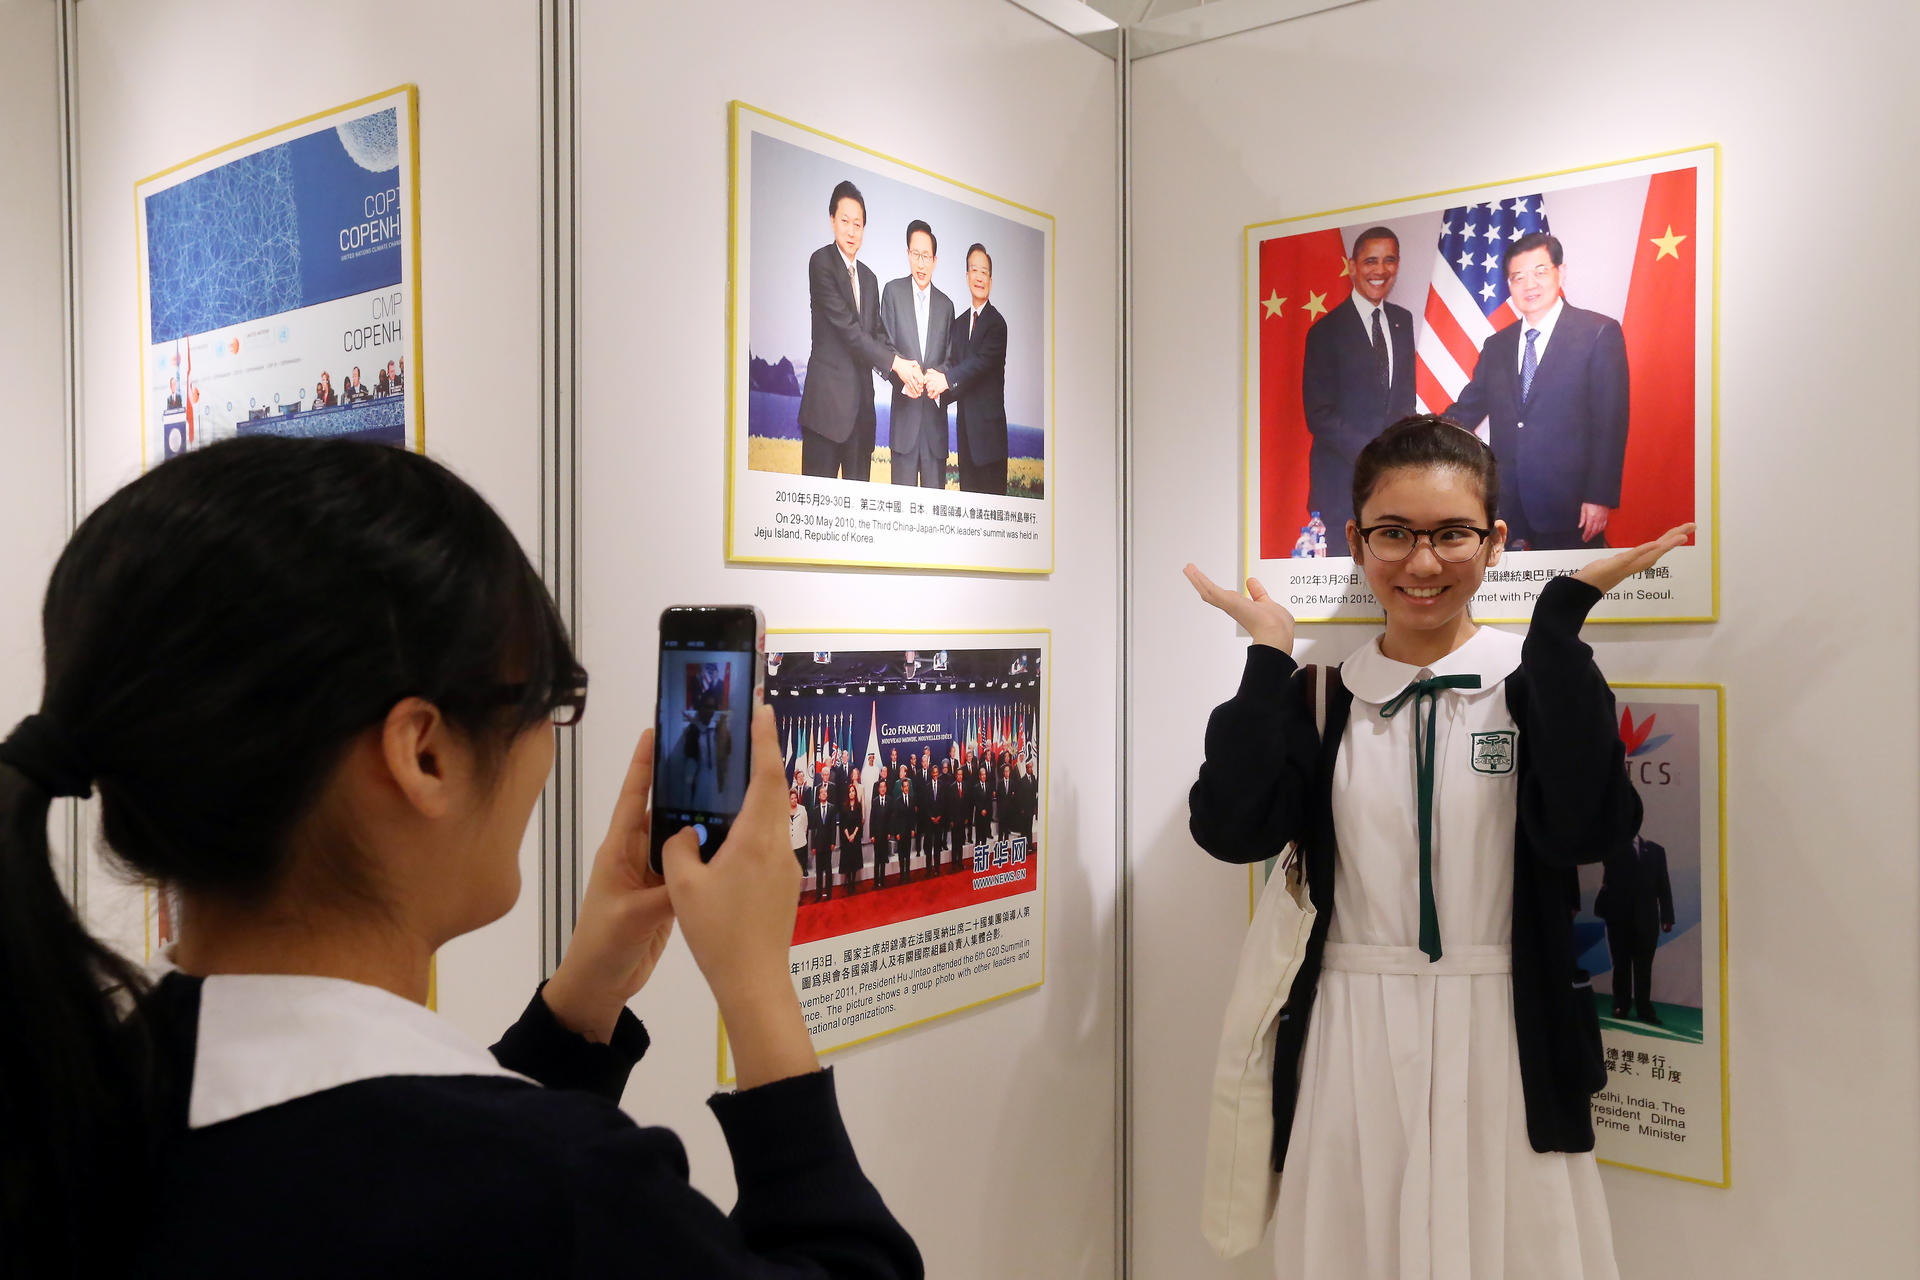 The open day at the Ministry of Foreign Affairs in Admiralty drew almost 2,400 people. Photo: K.Y. Cheng